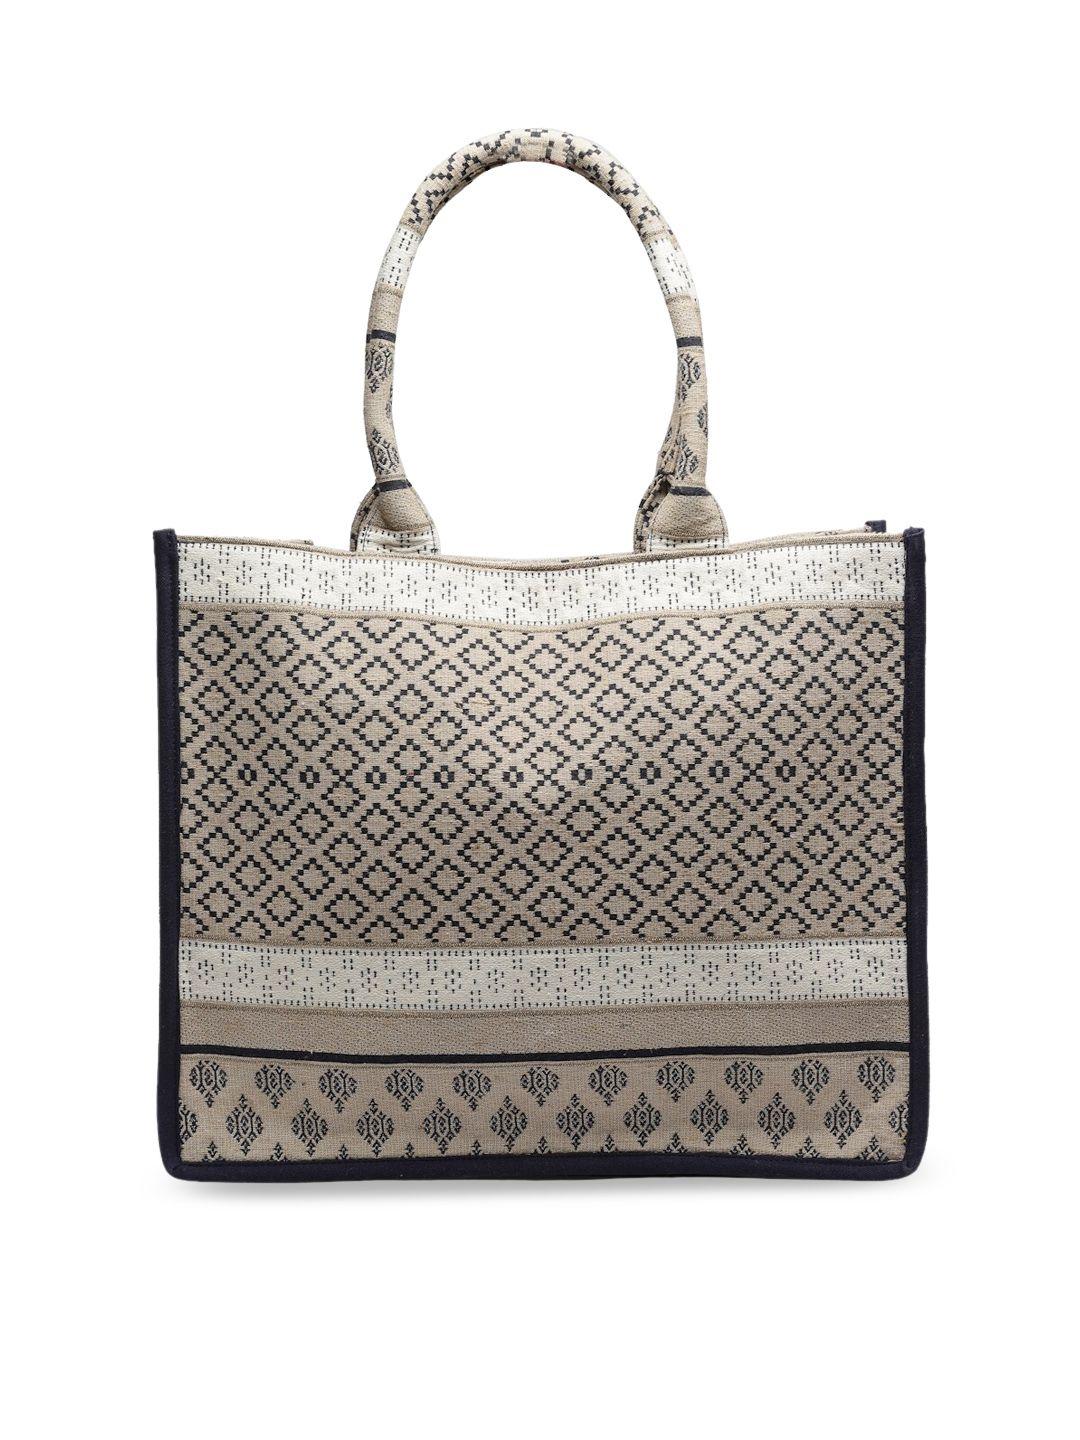 anekaant textured structured handheld bag